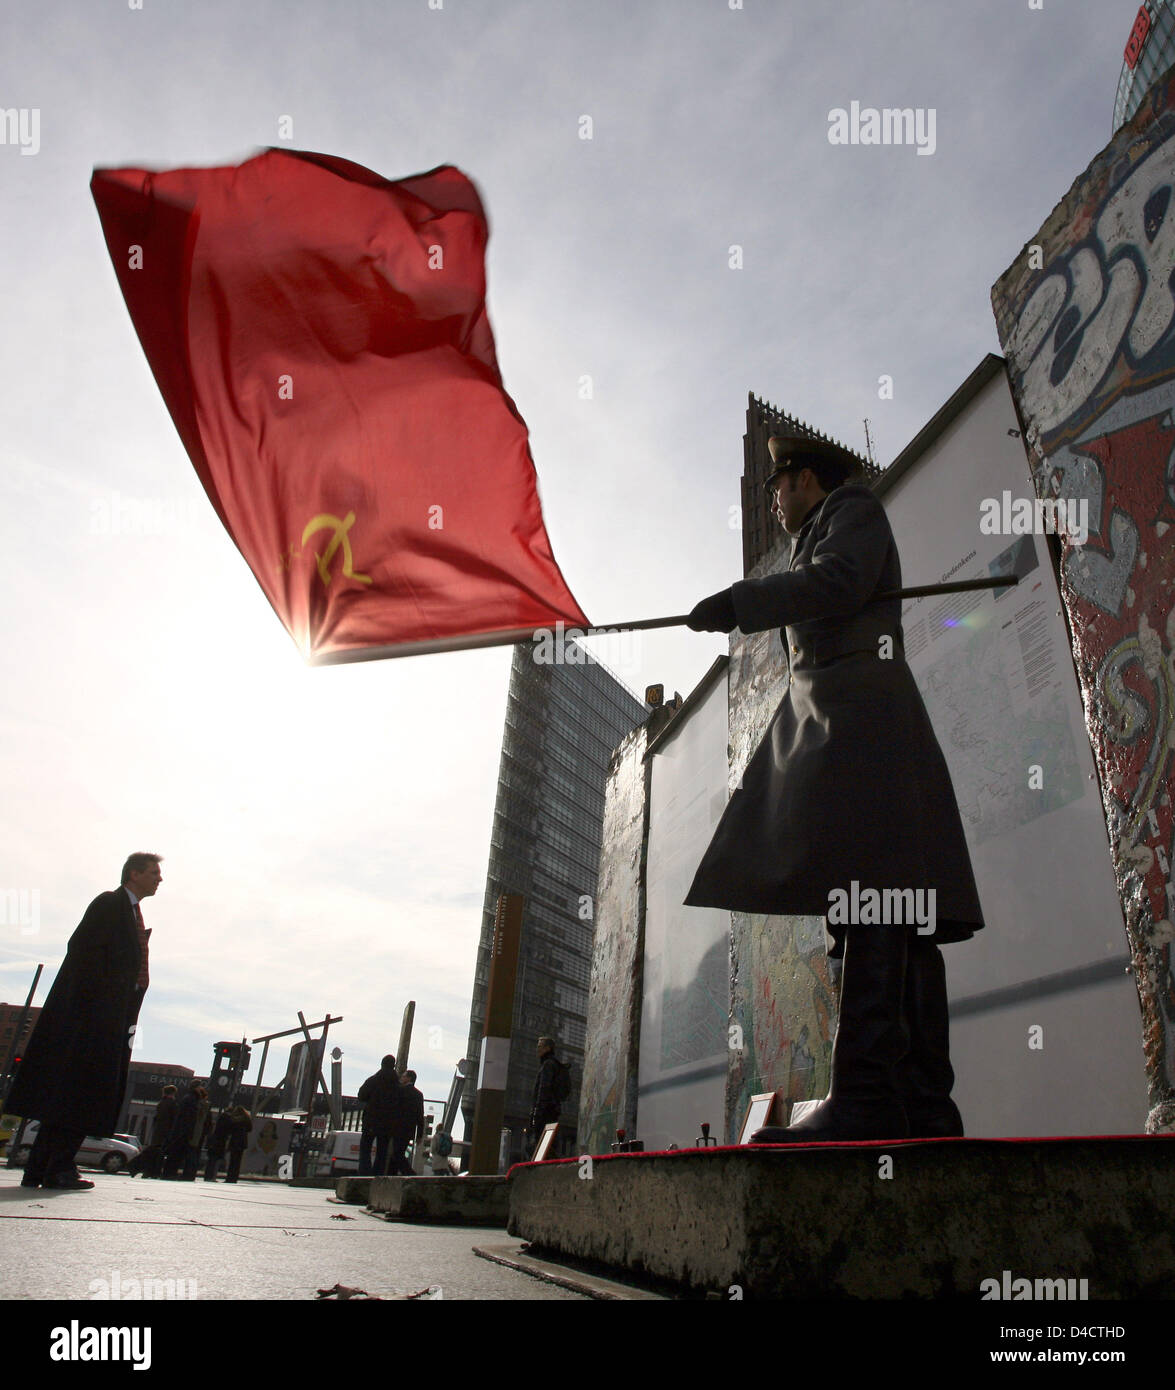 Actor Samir Fuchs, dressed up as a Soviet soldier, waves the Soviet flag in front of the sun at Potsdamer Platz in Berlin, Germany, 20 February 2008. Visitors can take pictures of Fuchs at a part of the Berlin Wall. Photo: RAINER JENSEN Stock Photo